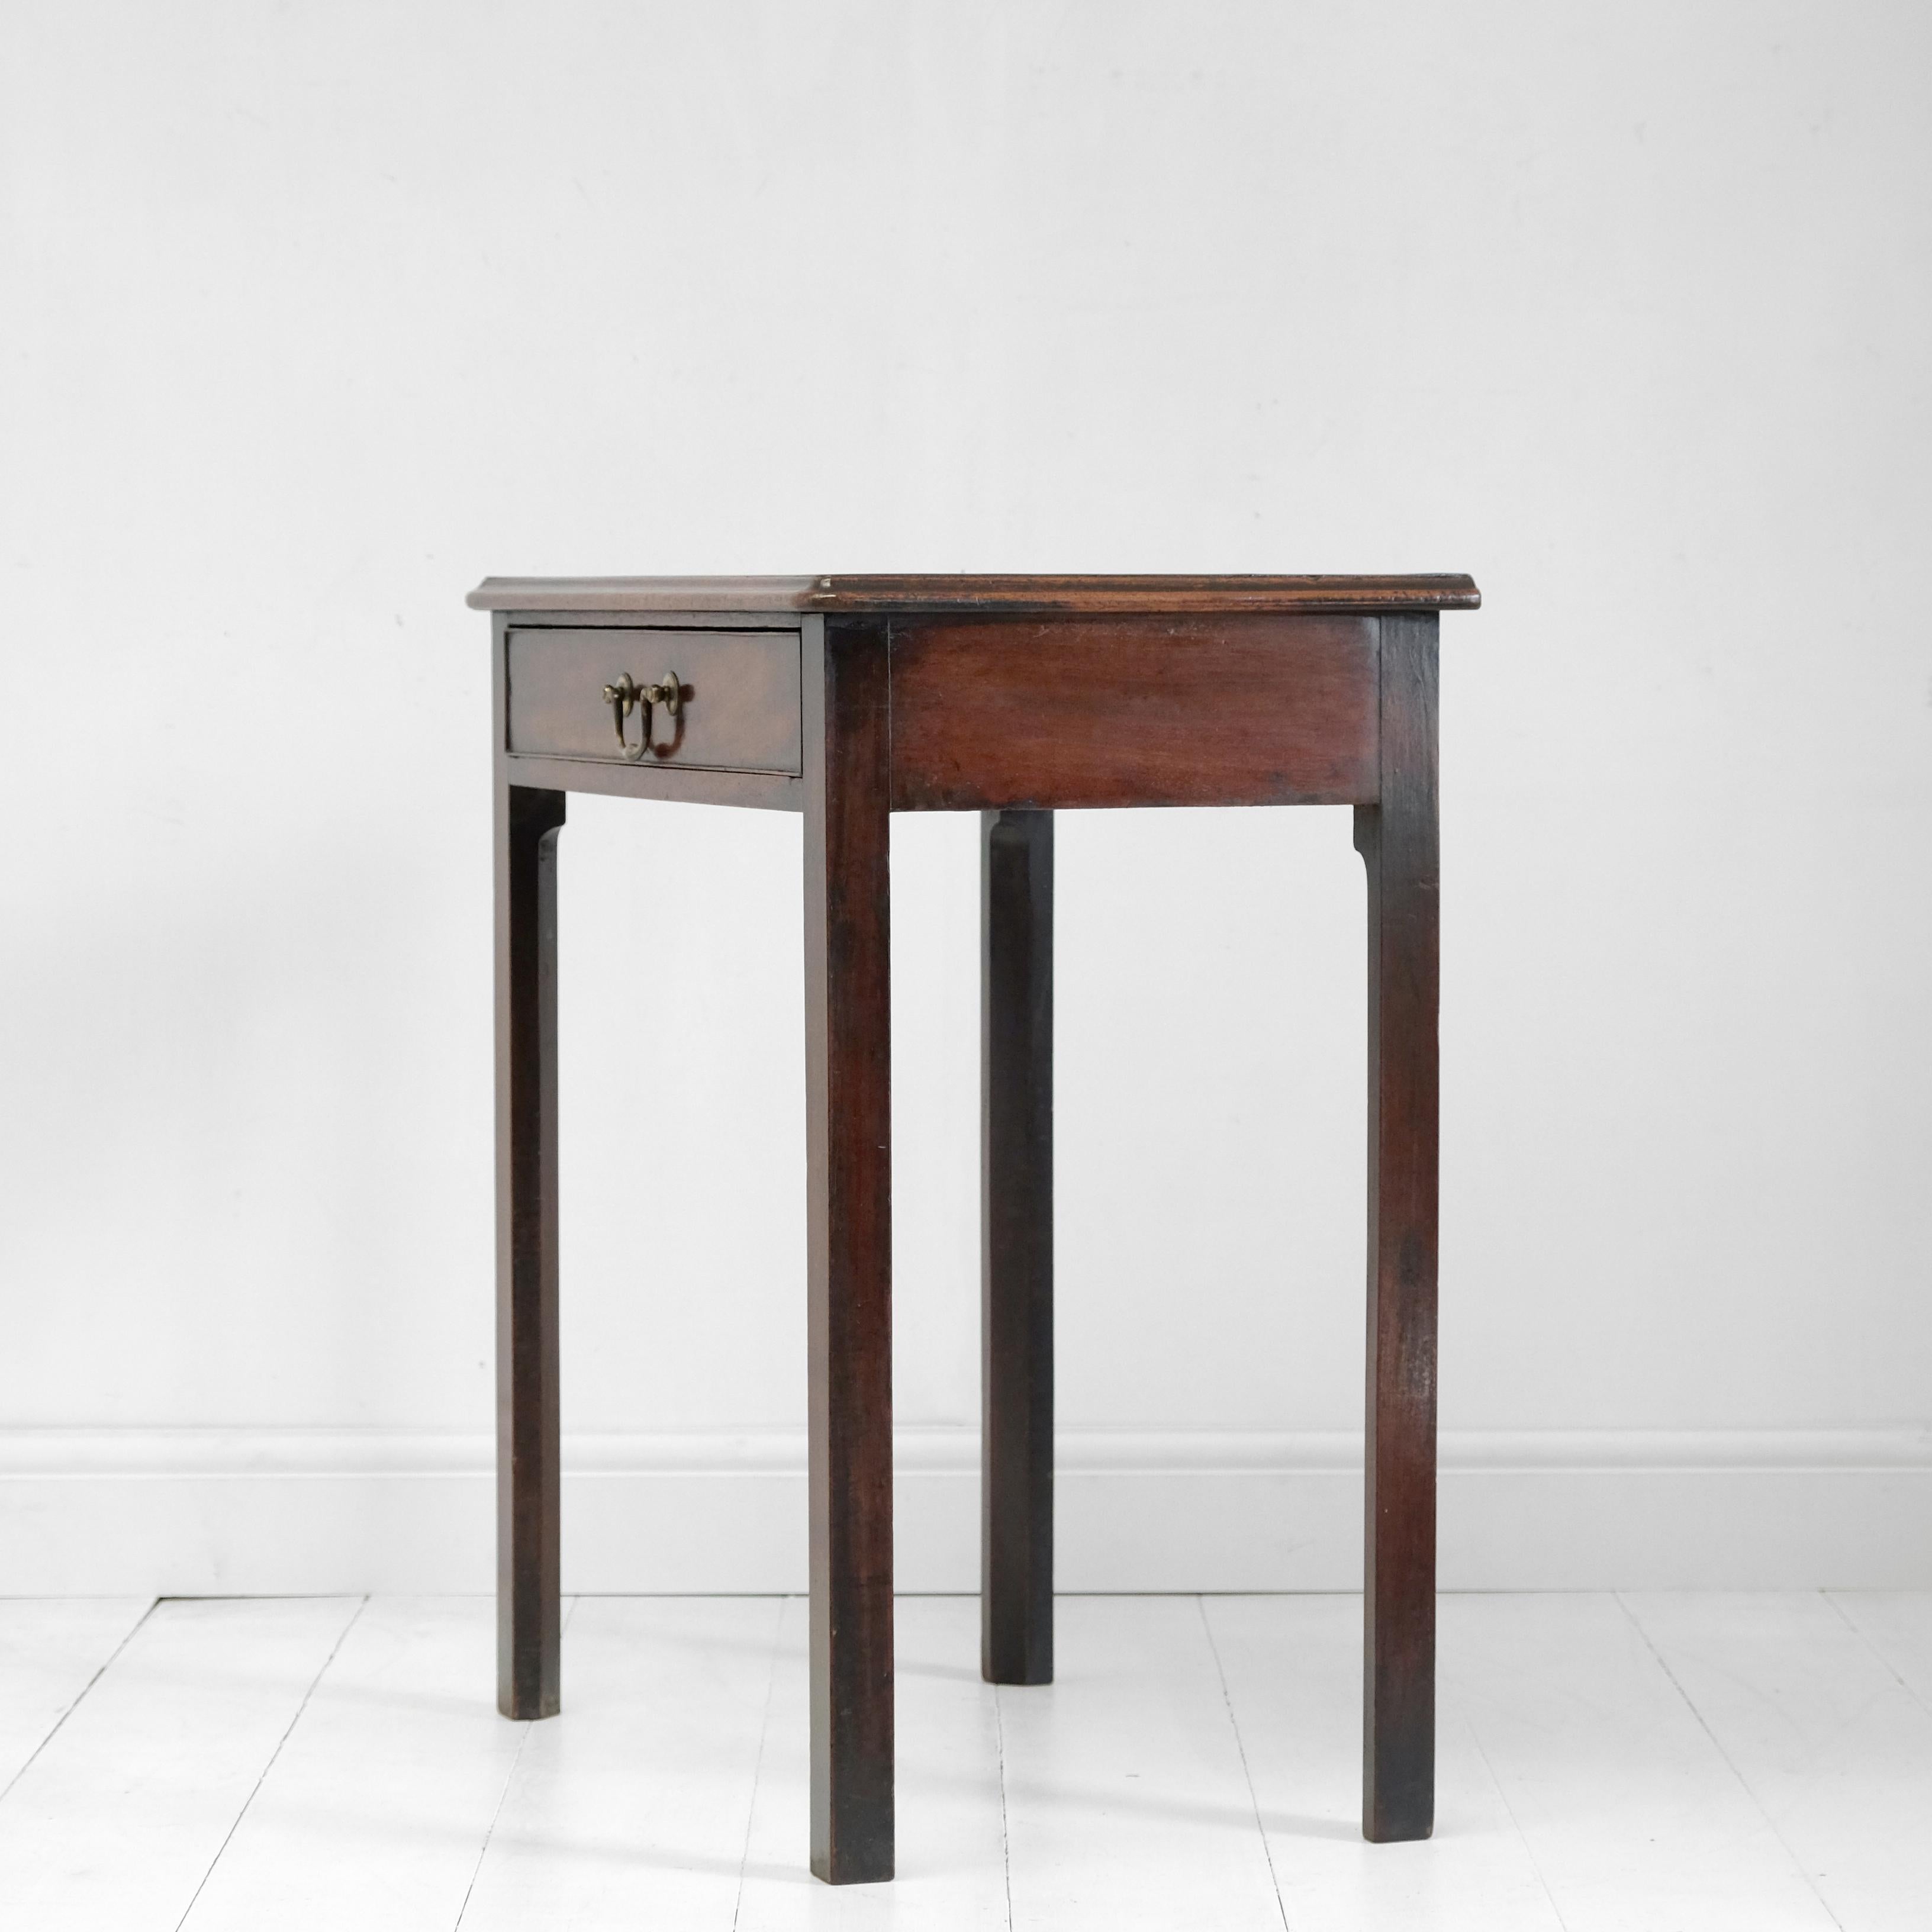 A diminutive Georgian side table in mahogany. In original condition with a lovely warm color and patina. Original swan neck brass handle to the oak-lined drawer. Simple chamfer-cut square legs with moulded top above. English, circa